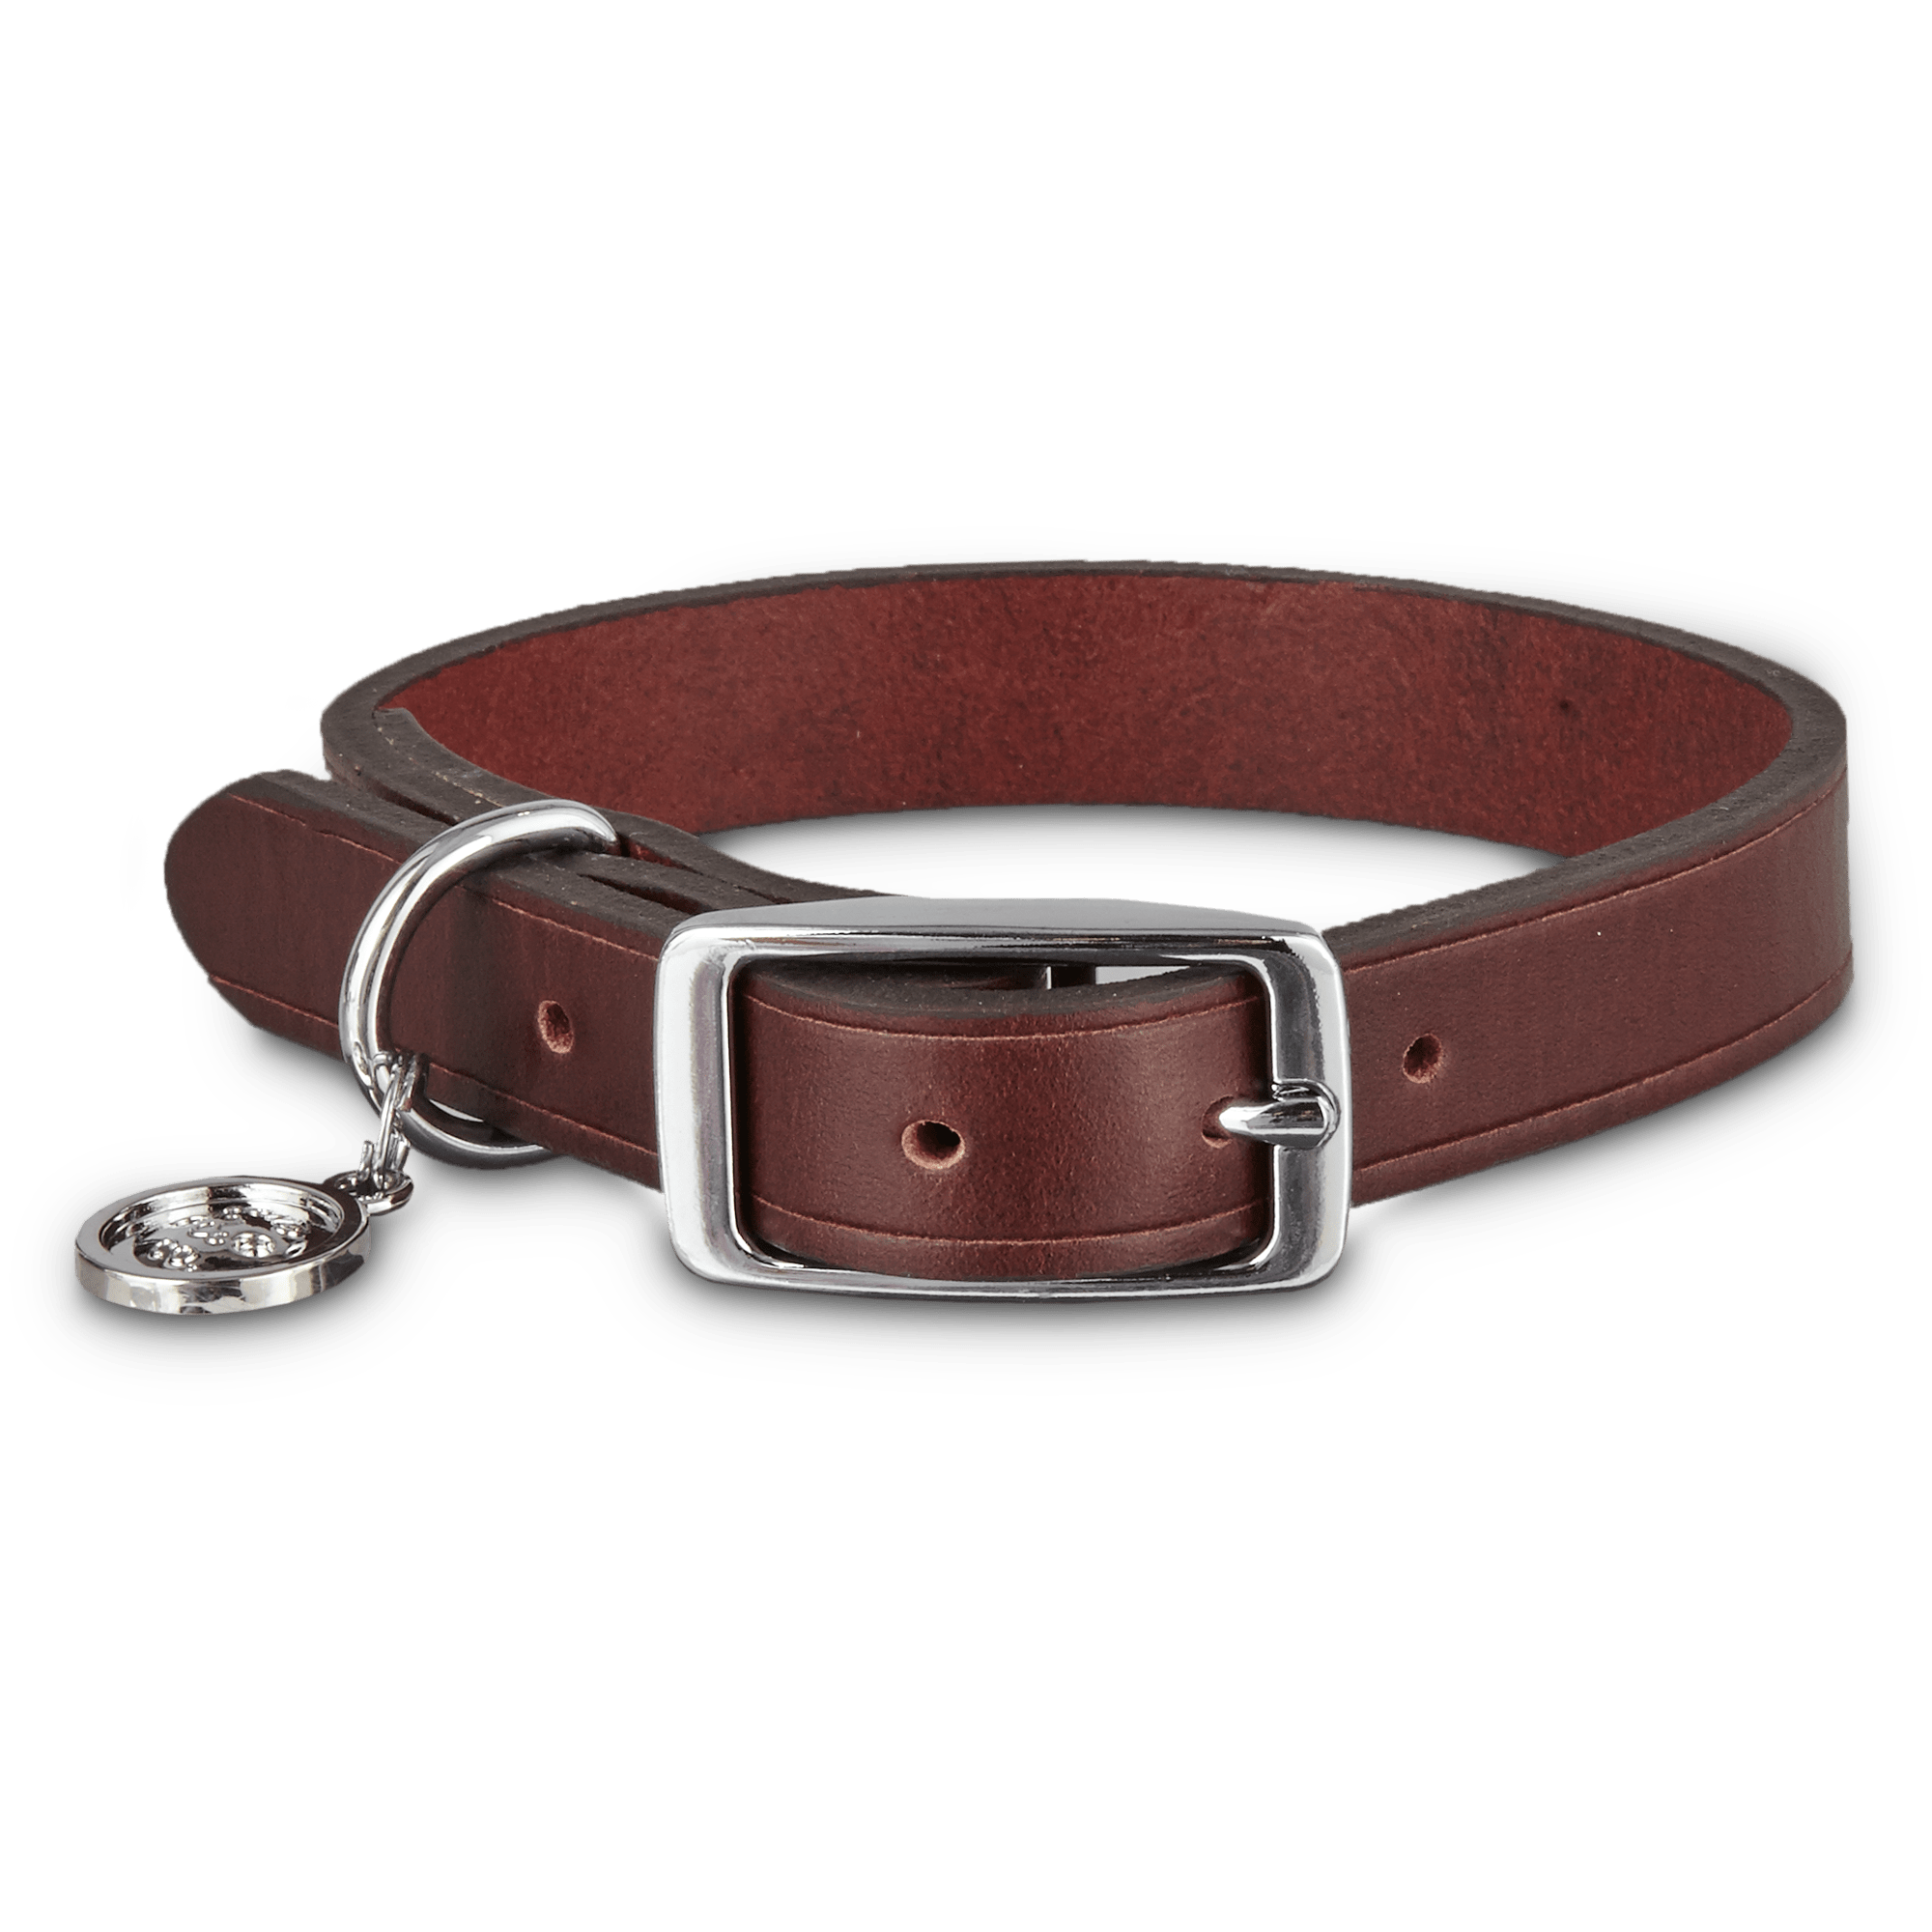 Bond & Co. Mahogany Leather Dog Collar, For Neck Sizes 12-15, Small